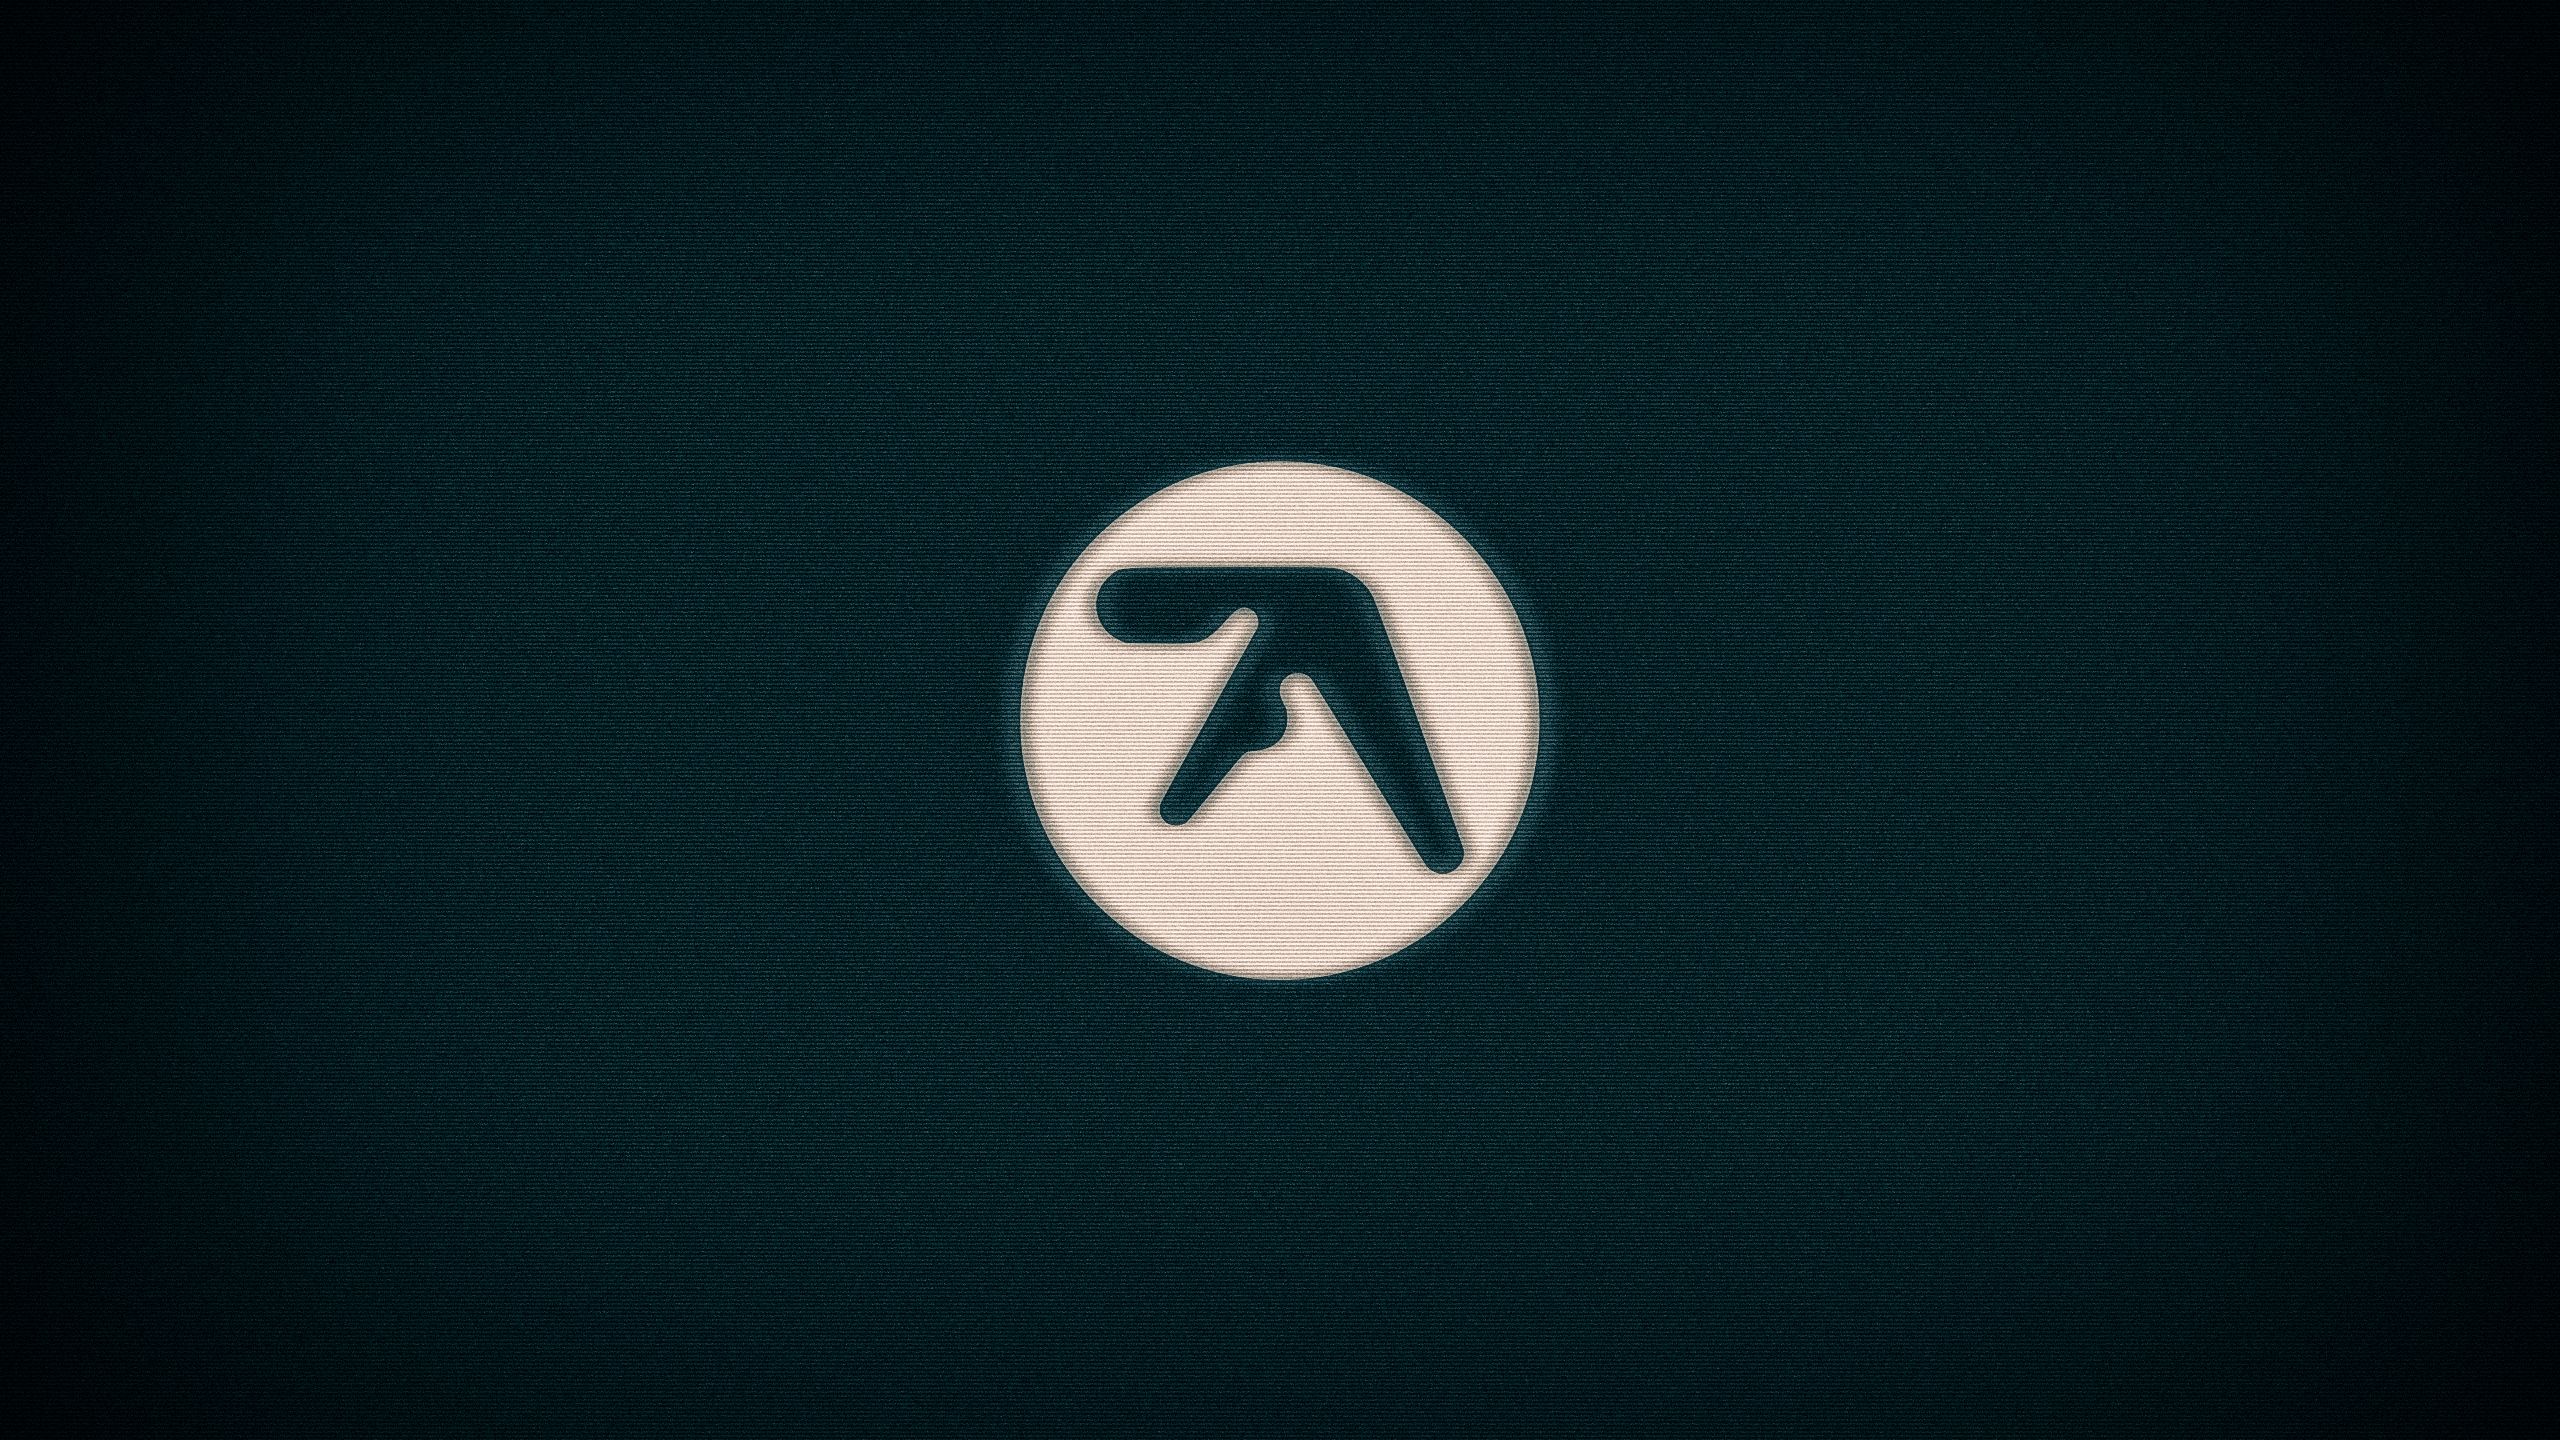 7 Aphex Twin HD Wallpapers Backgrounds - Wallpaper Abyss